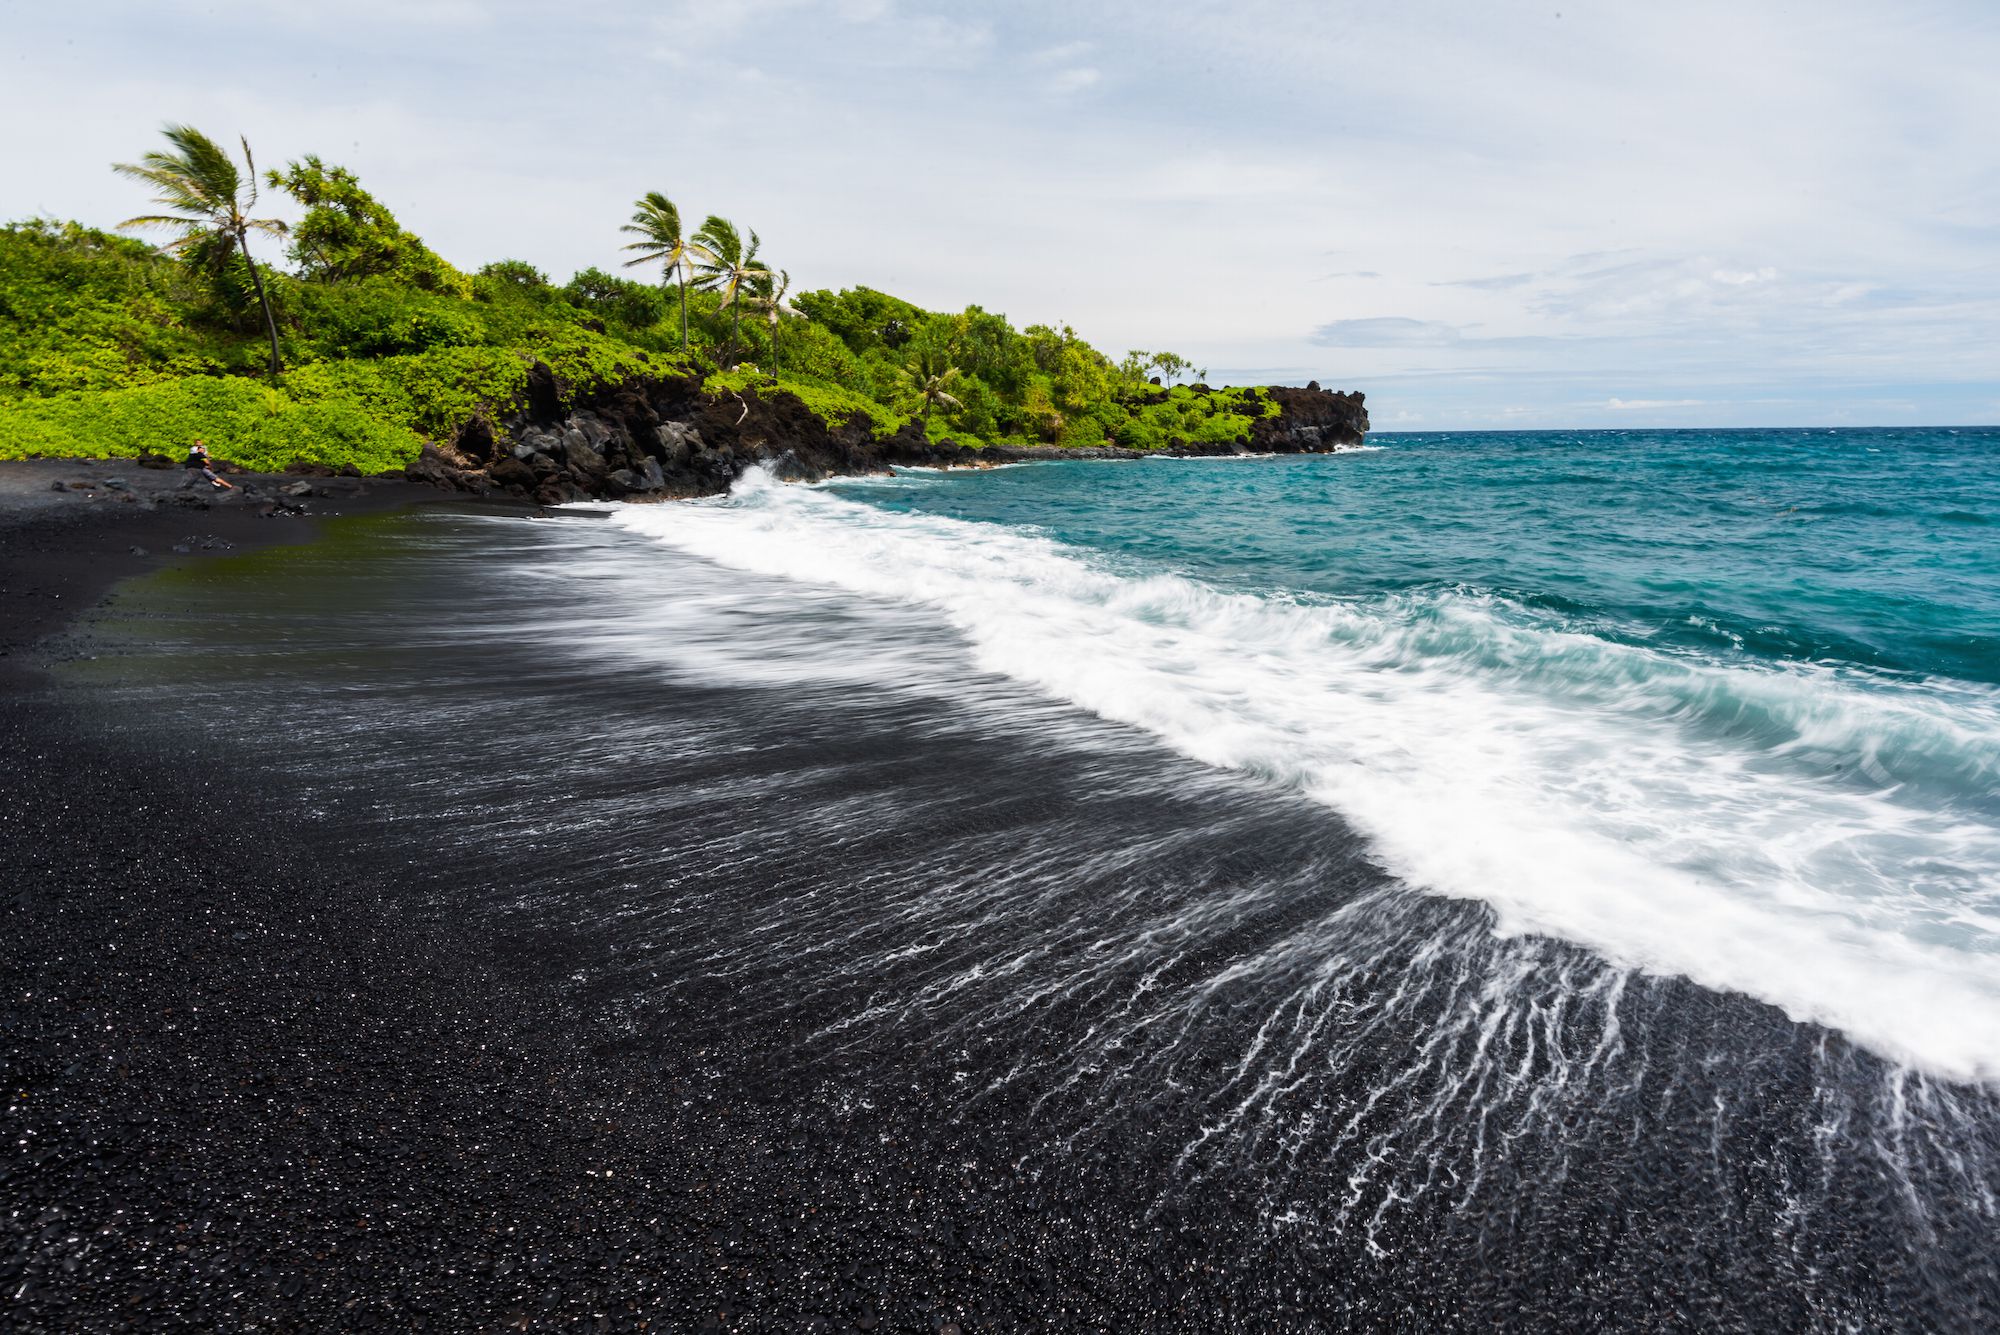 20 Best Black Sand Beaches in the World - Where Are Black Sand Beaches?